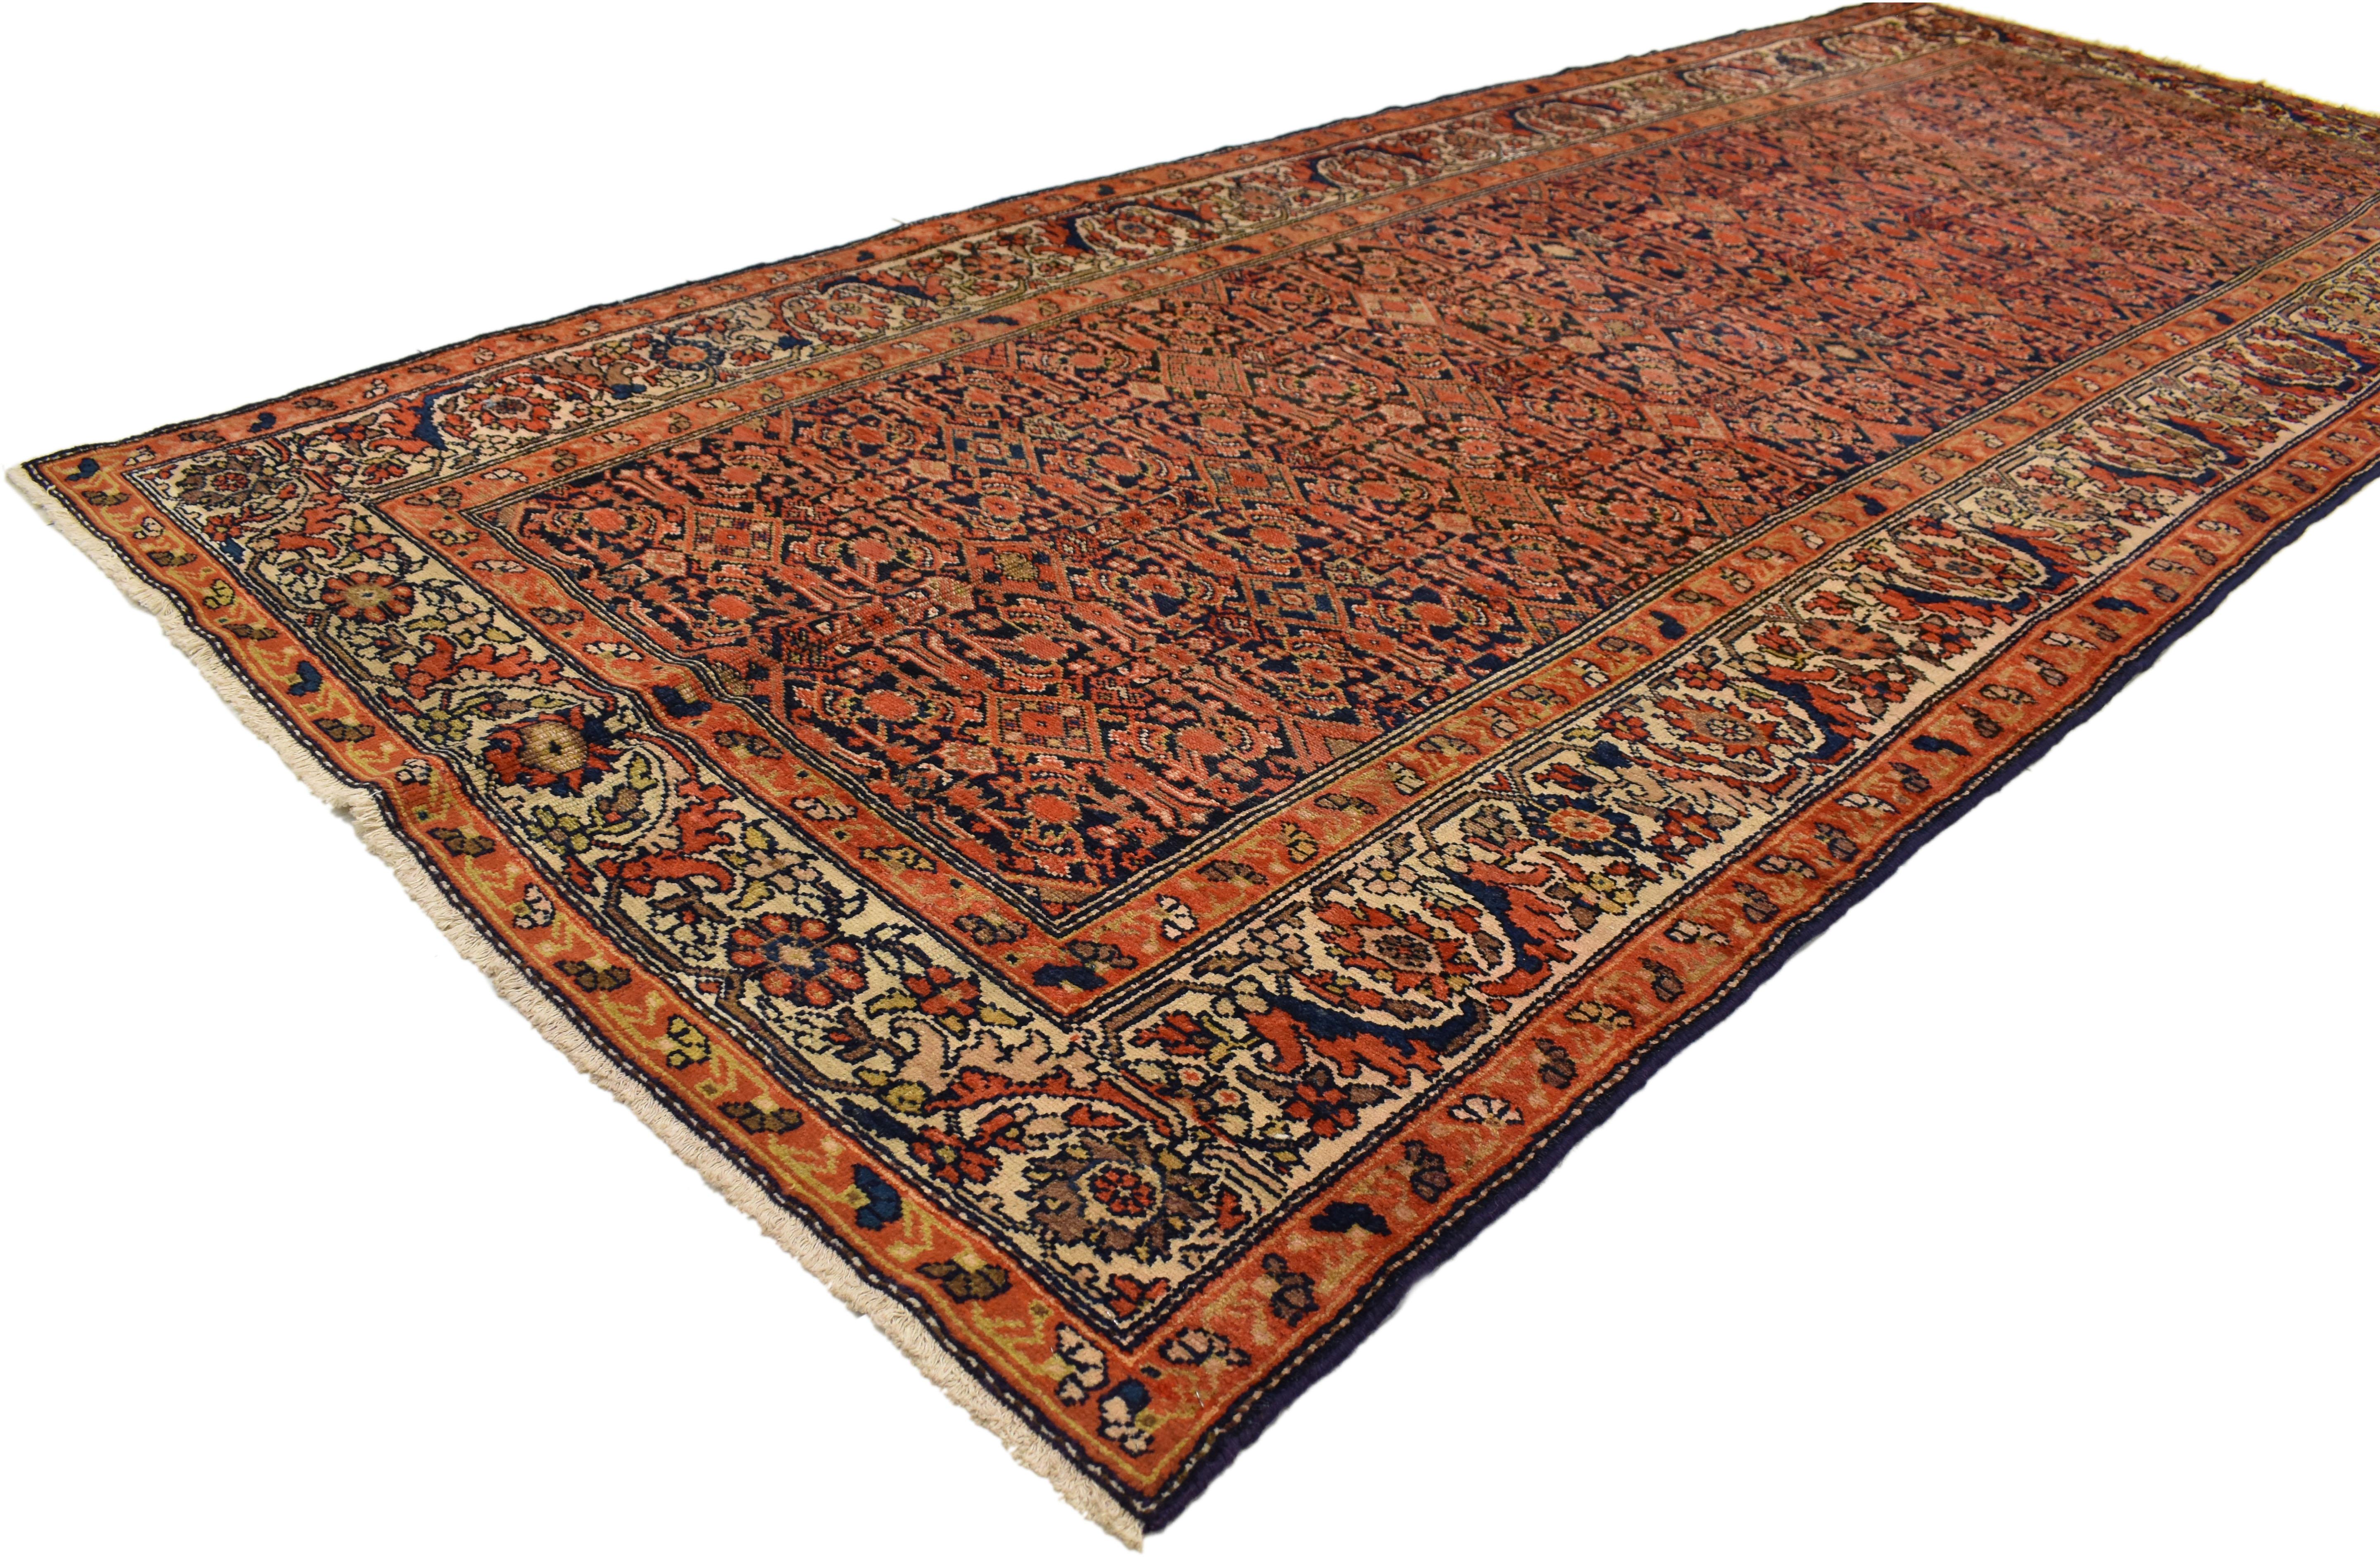 76511, antique Persian Malayer gallery rug, wide hallway runner. Sophisticated and full of character, this antique Persian Malayer gallery rug combines traditional character with modern style. With its refined color palette and bold elemental